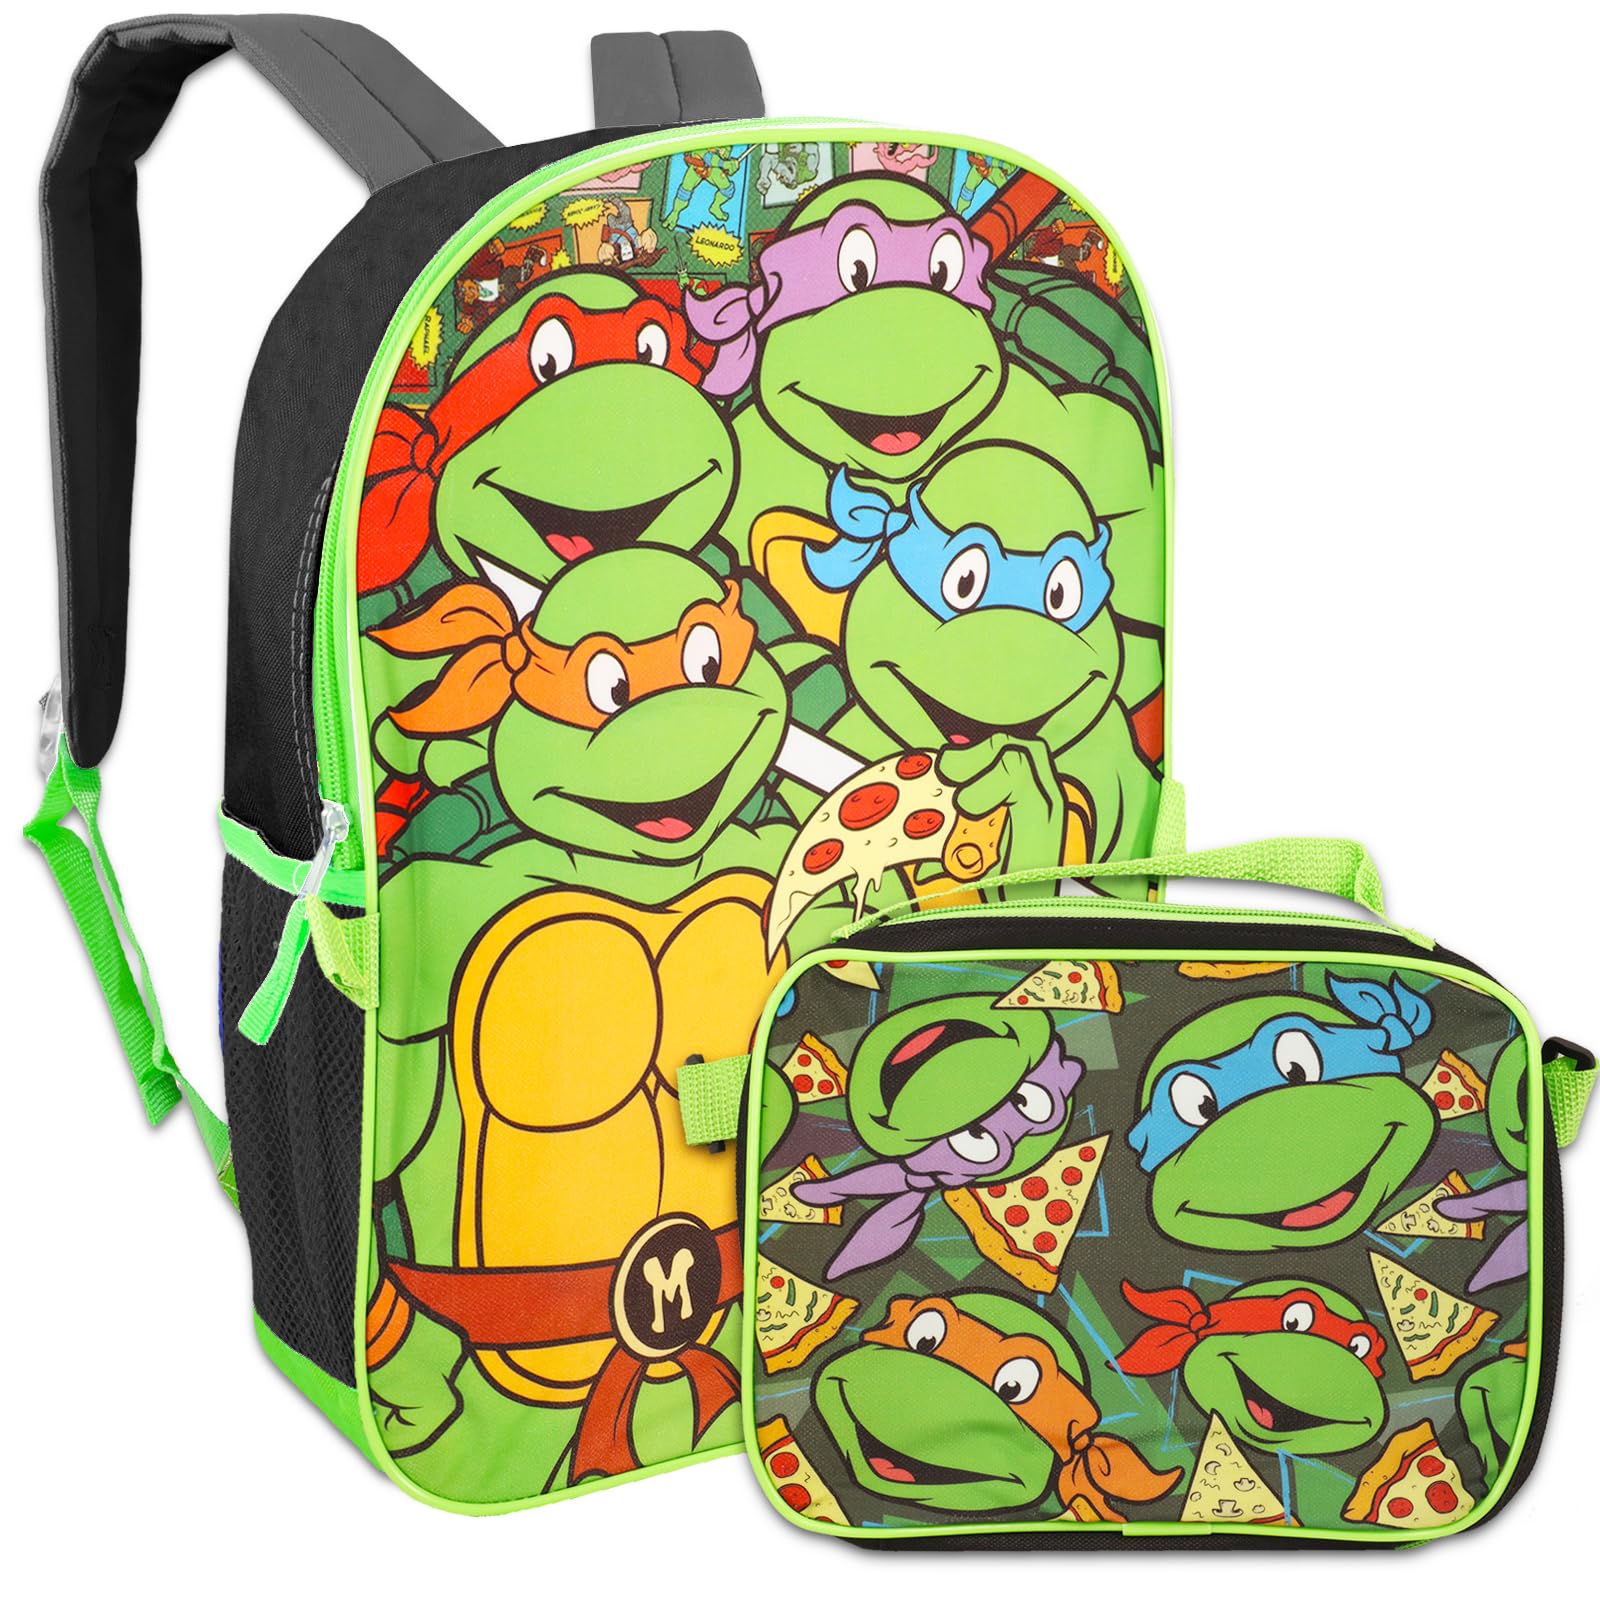 Teenage Mutant Ninja Turtles Backpack and Lunch Box for Boys - Bundle with 16” TMNT Backpack for School, Lunch Bag, Stickers, Phone Wallet, More | TMNT Backpack Set